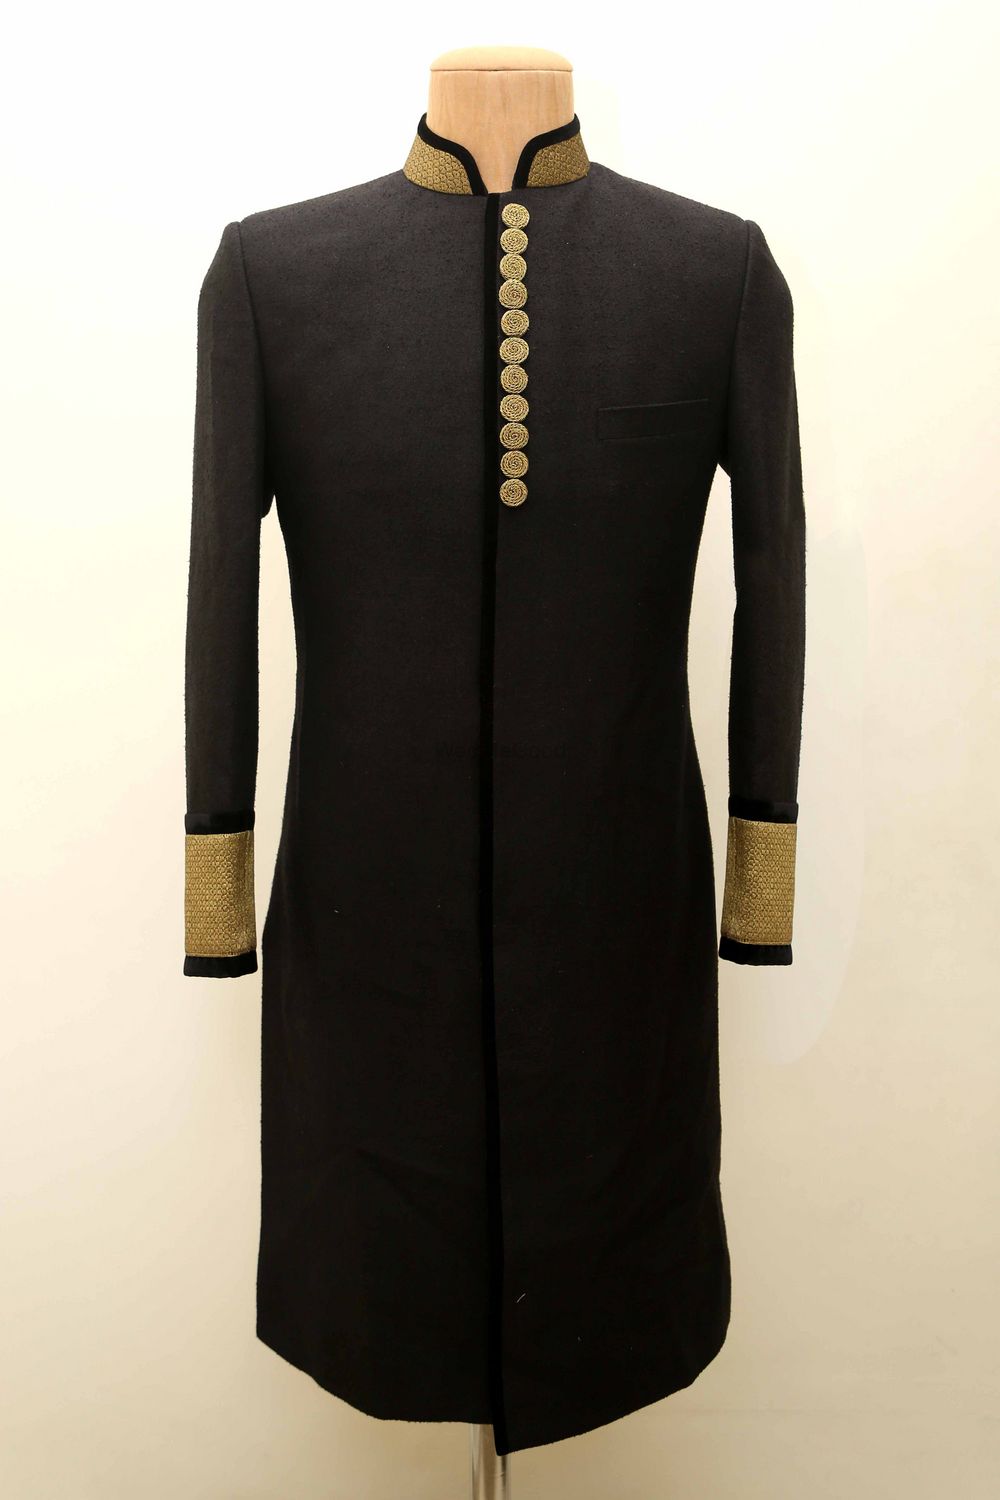 Photo of High neck bandhgala with full sleeves